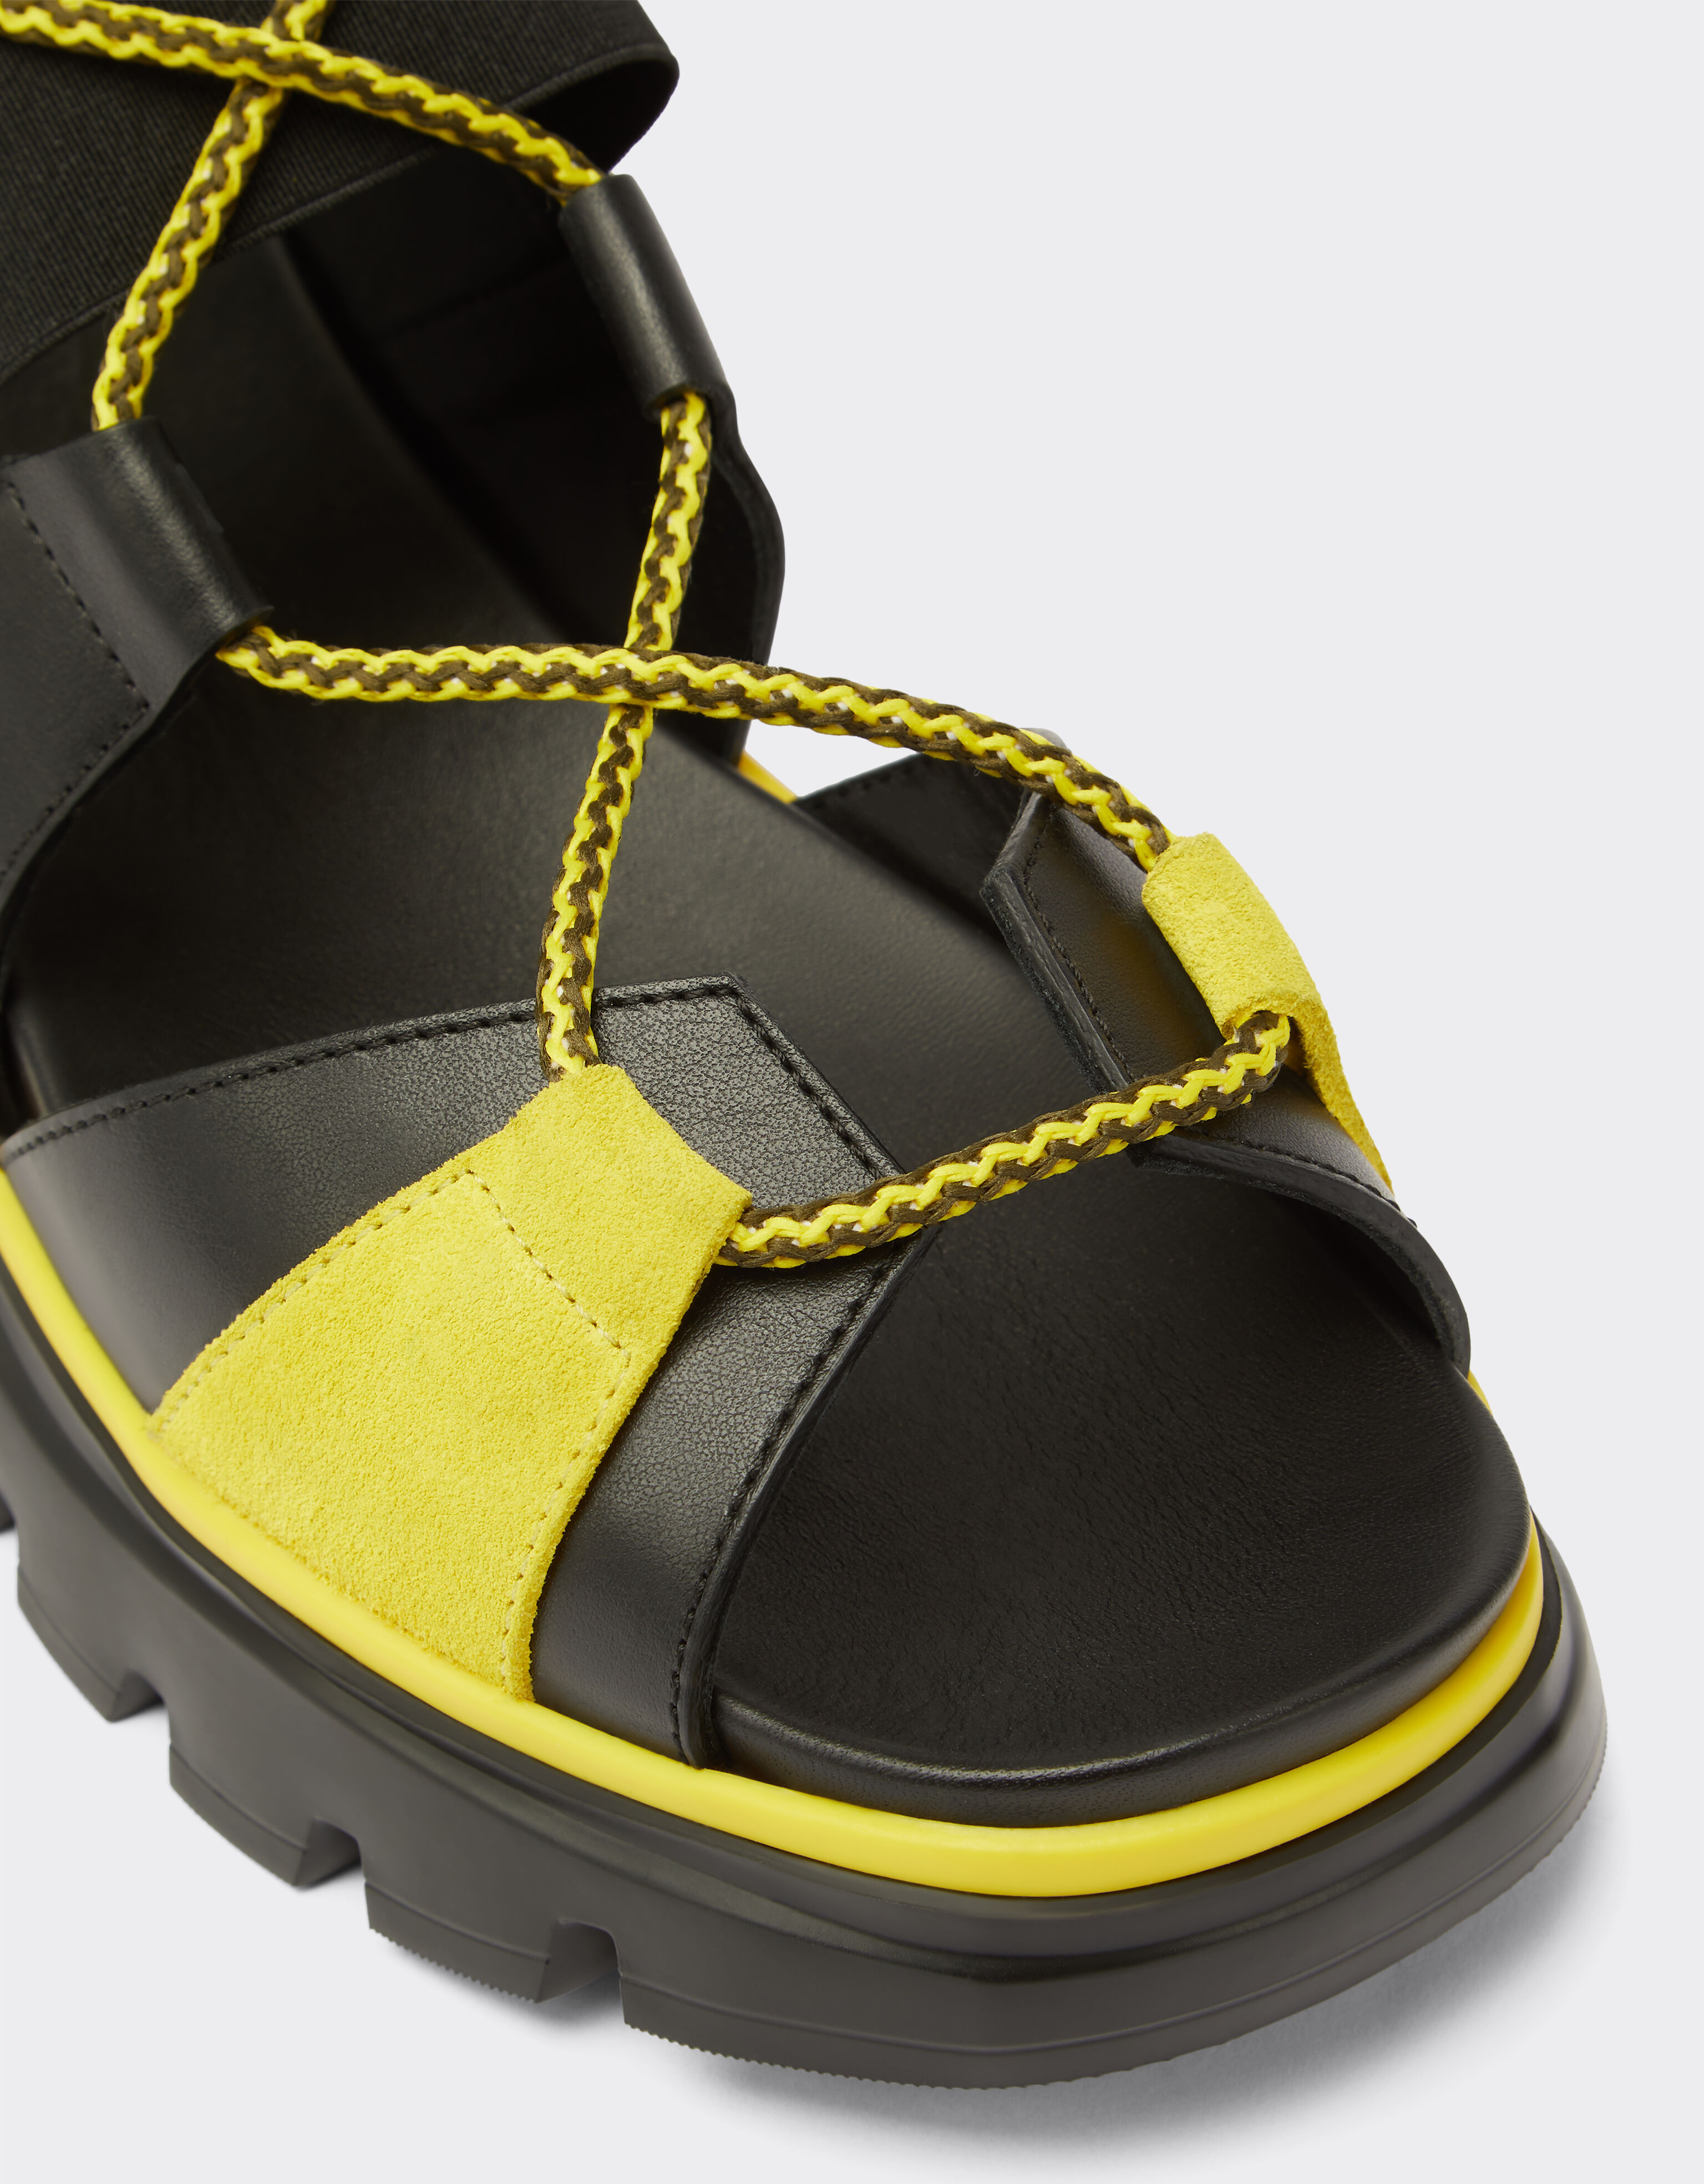 Ferrari Leather and suede sandals with crossover laces 黑色 20310f